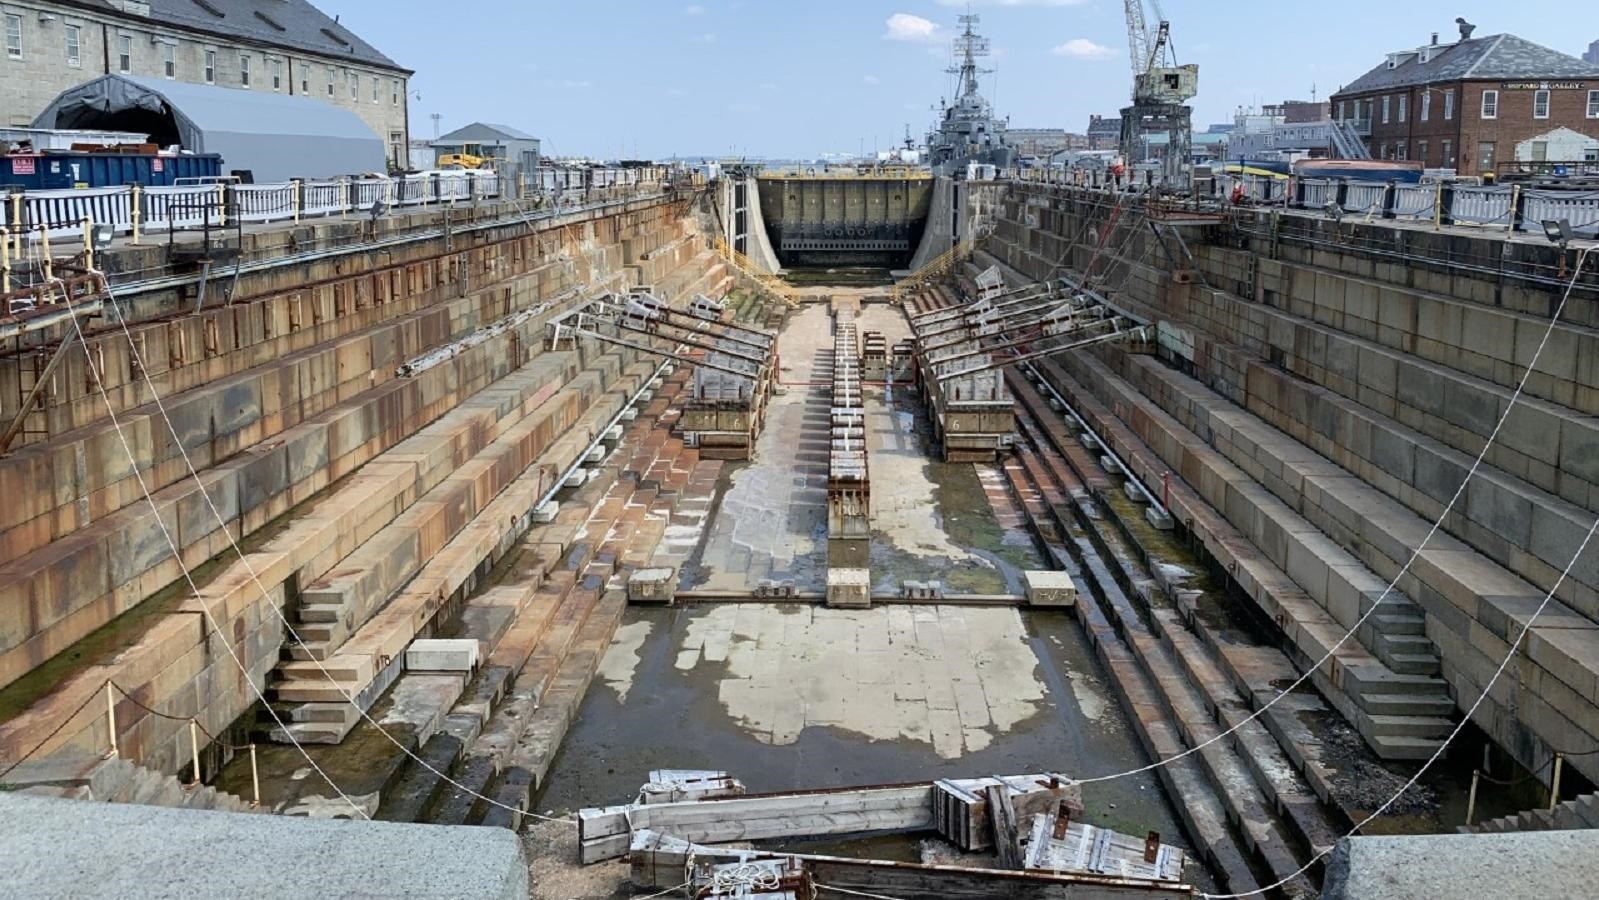 A granite dry dock about 400 feet long.